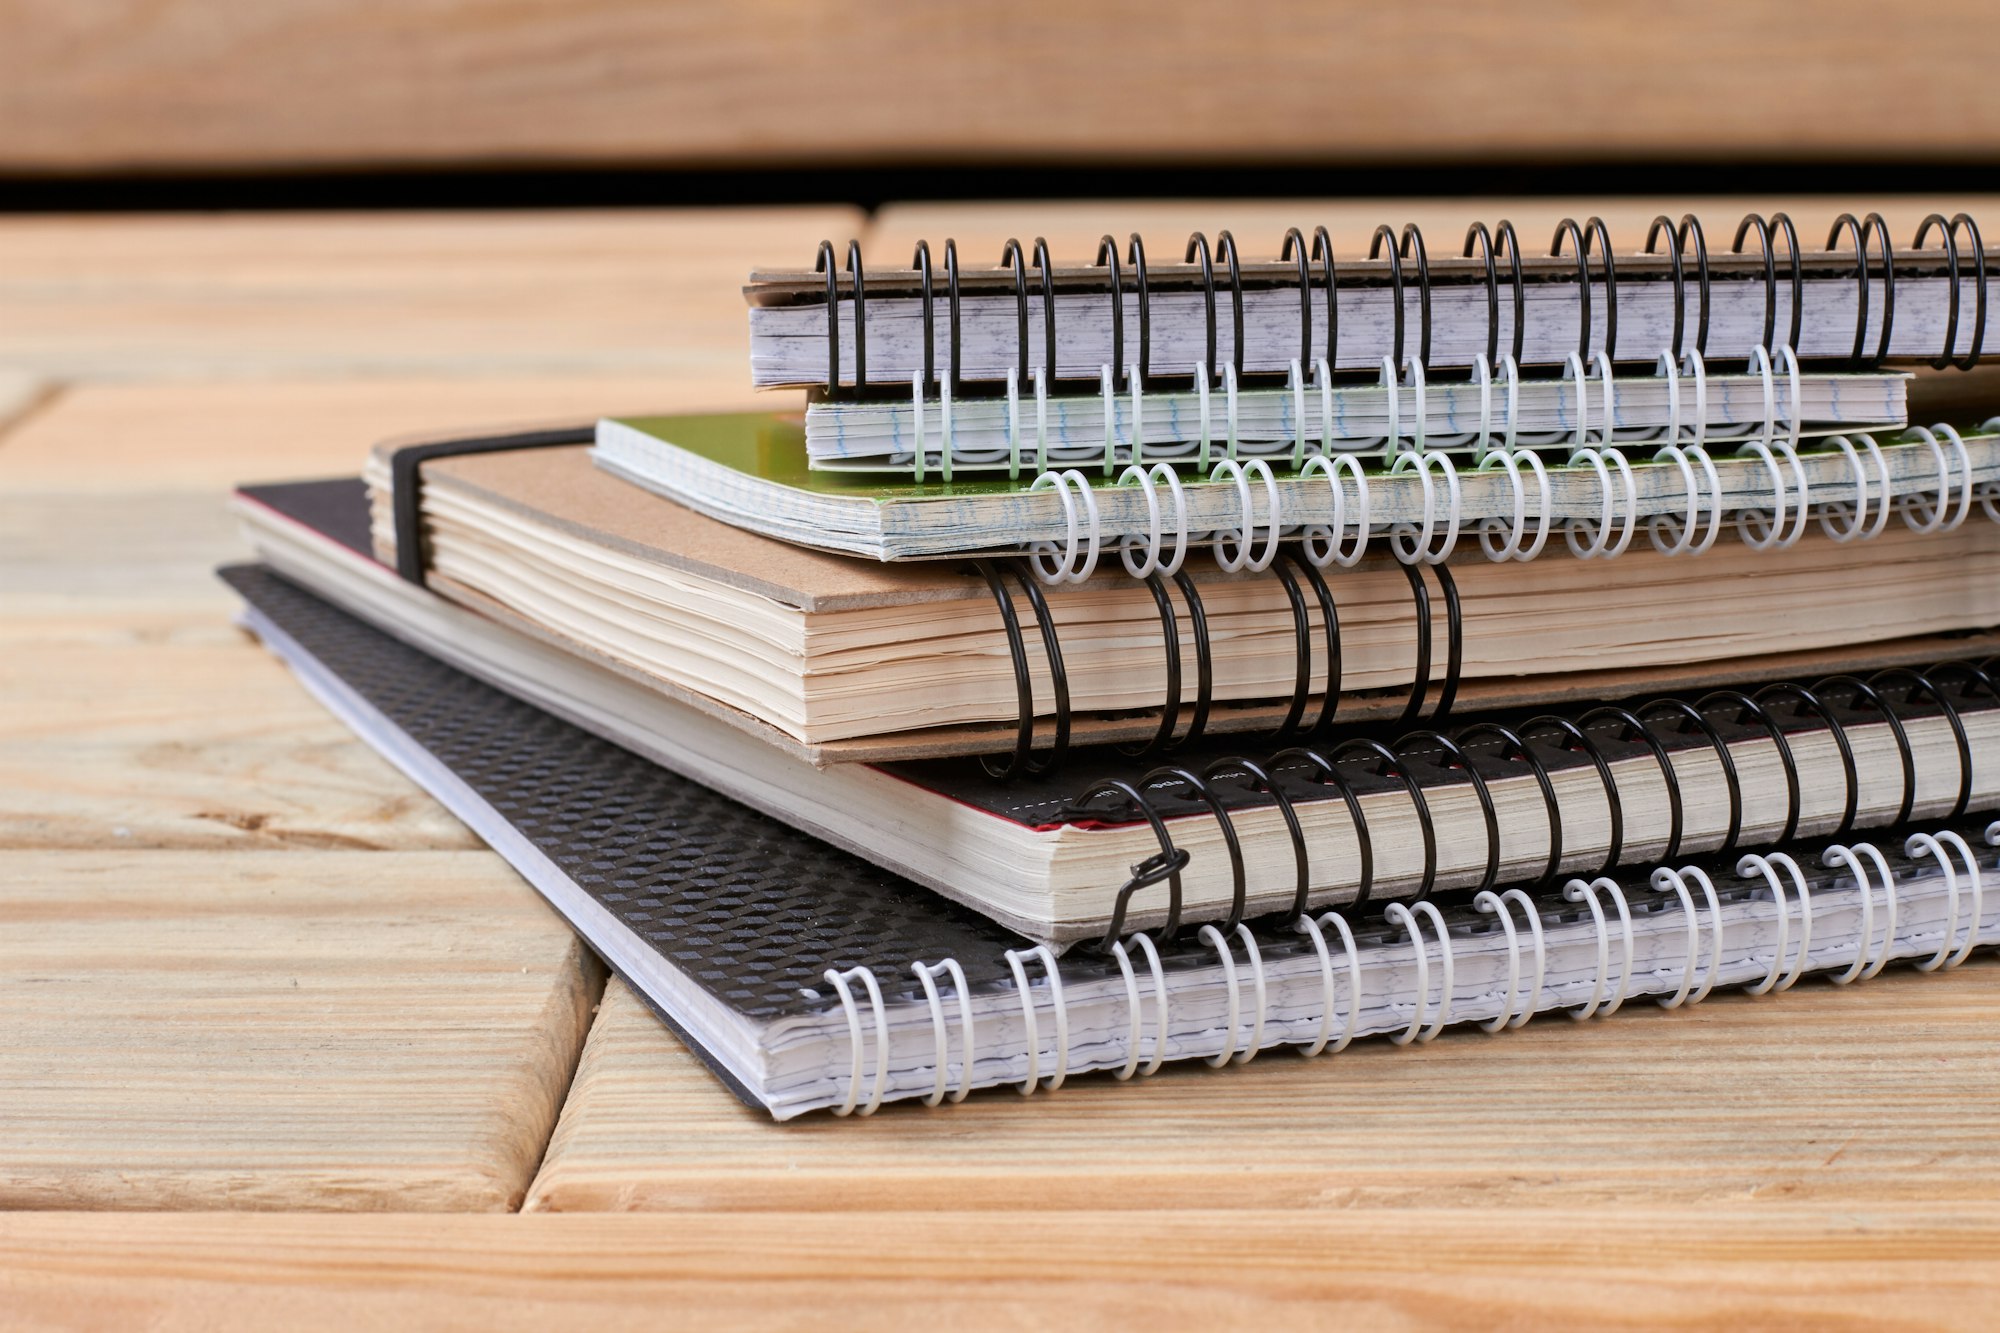 Stack of spiral notebooks on wooden background.